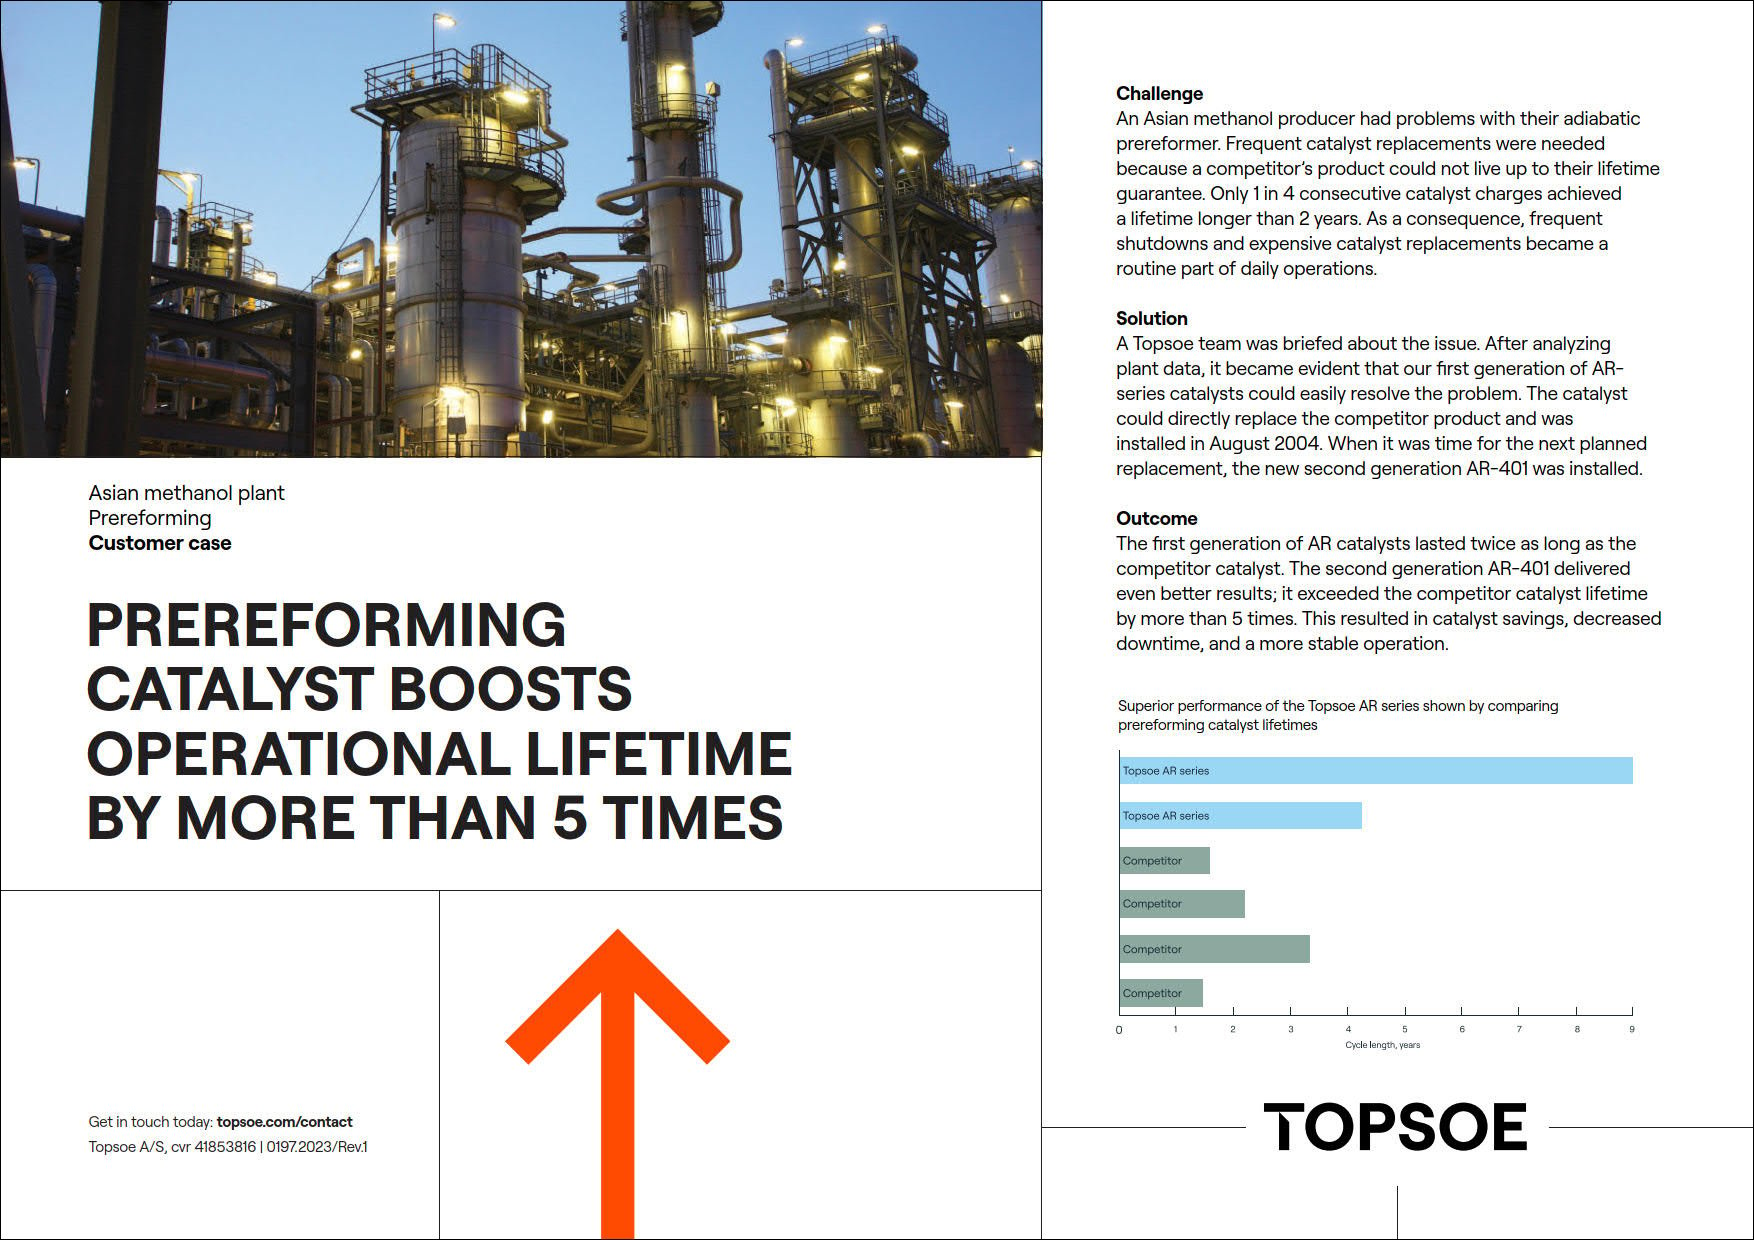 Pre-reforming catalyst boots operational lifetime by more than 5 times